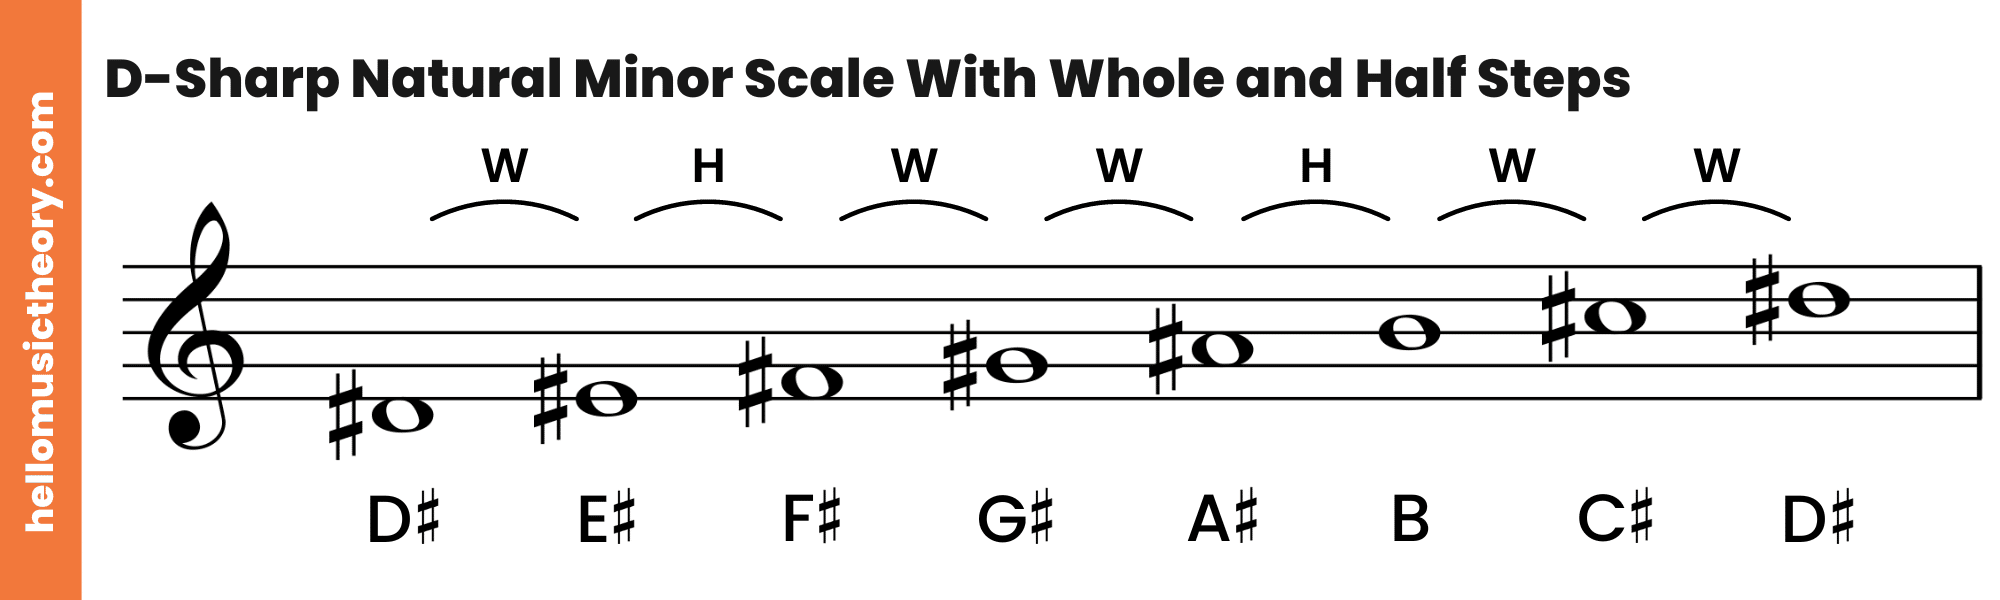 D-Sharp Natural Minor Scale Treble Clef Ascending With Whole and Half Steps